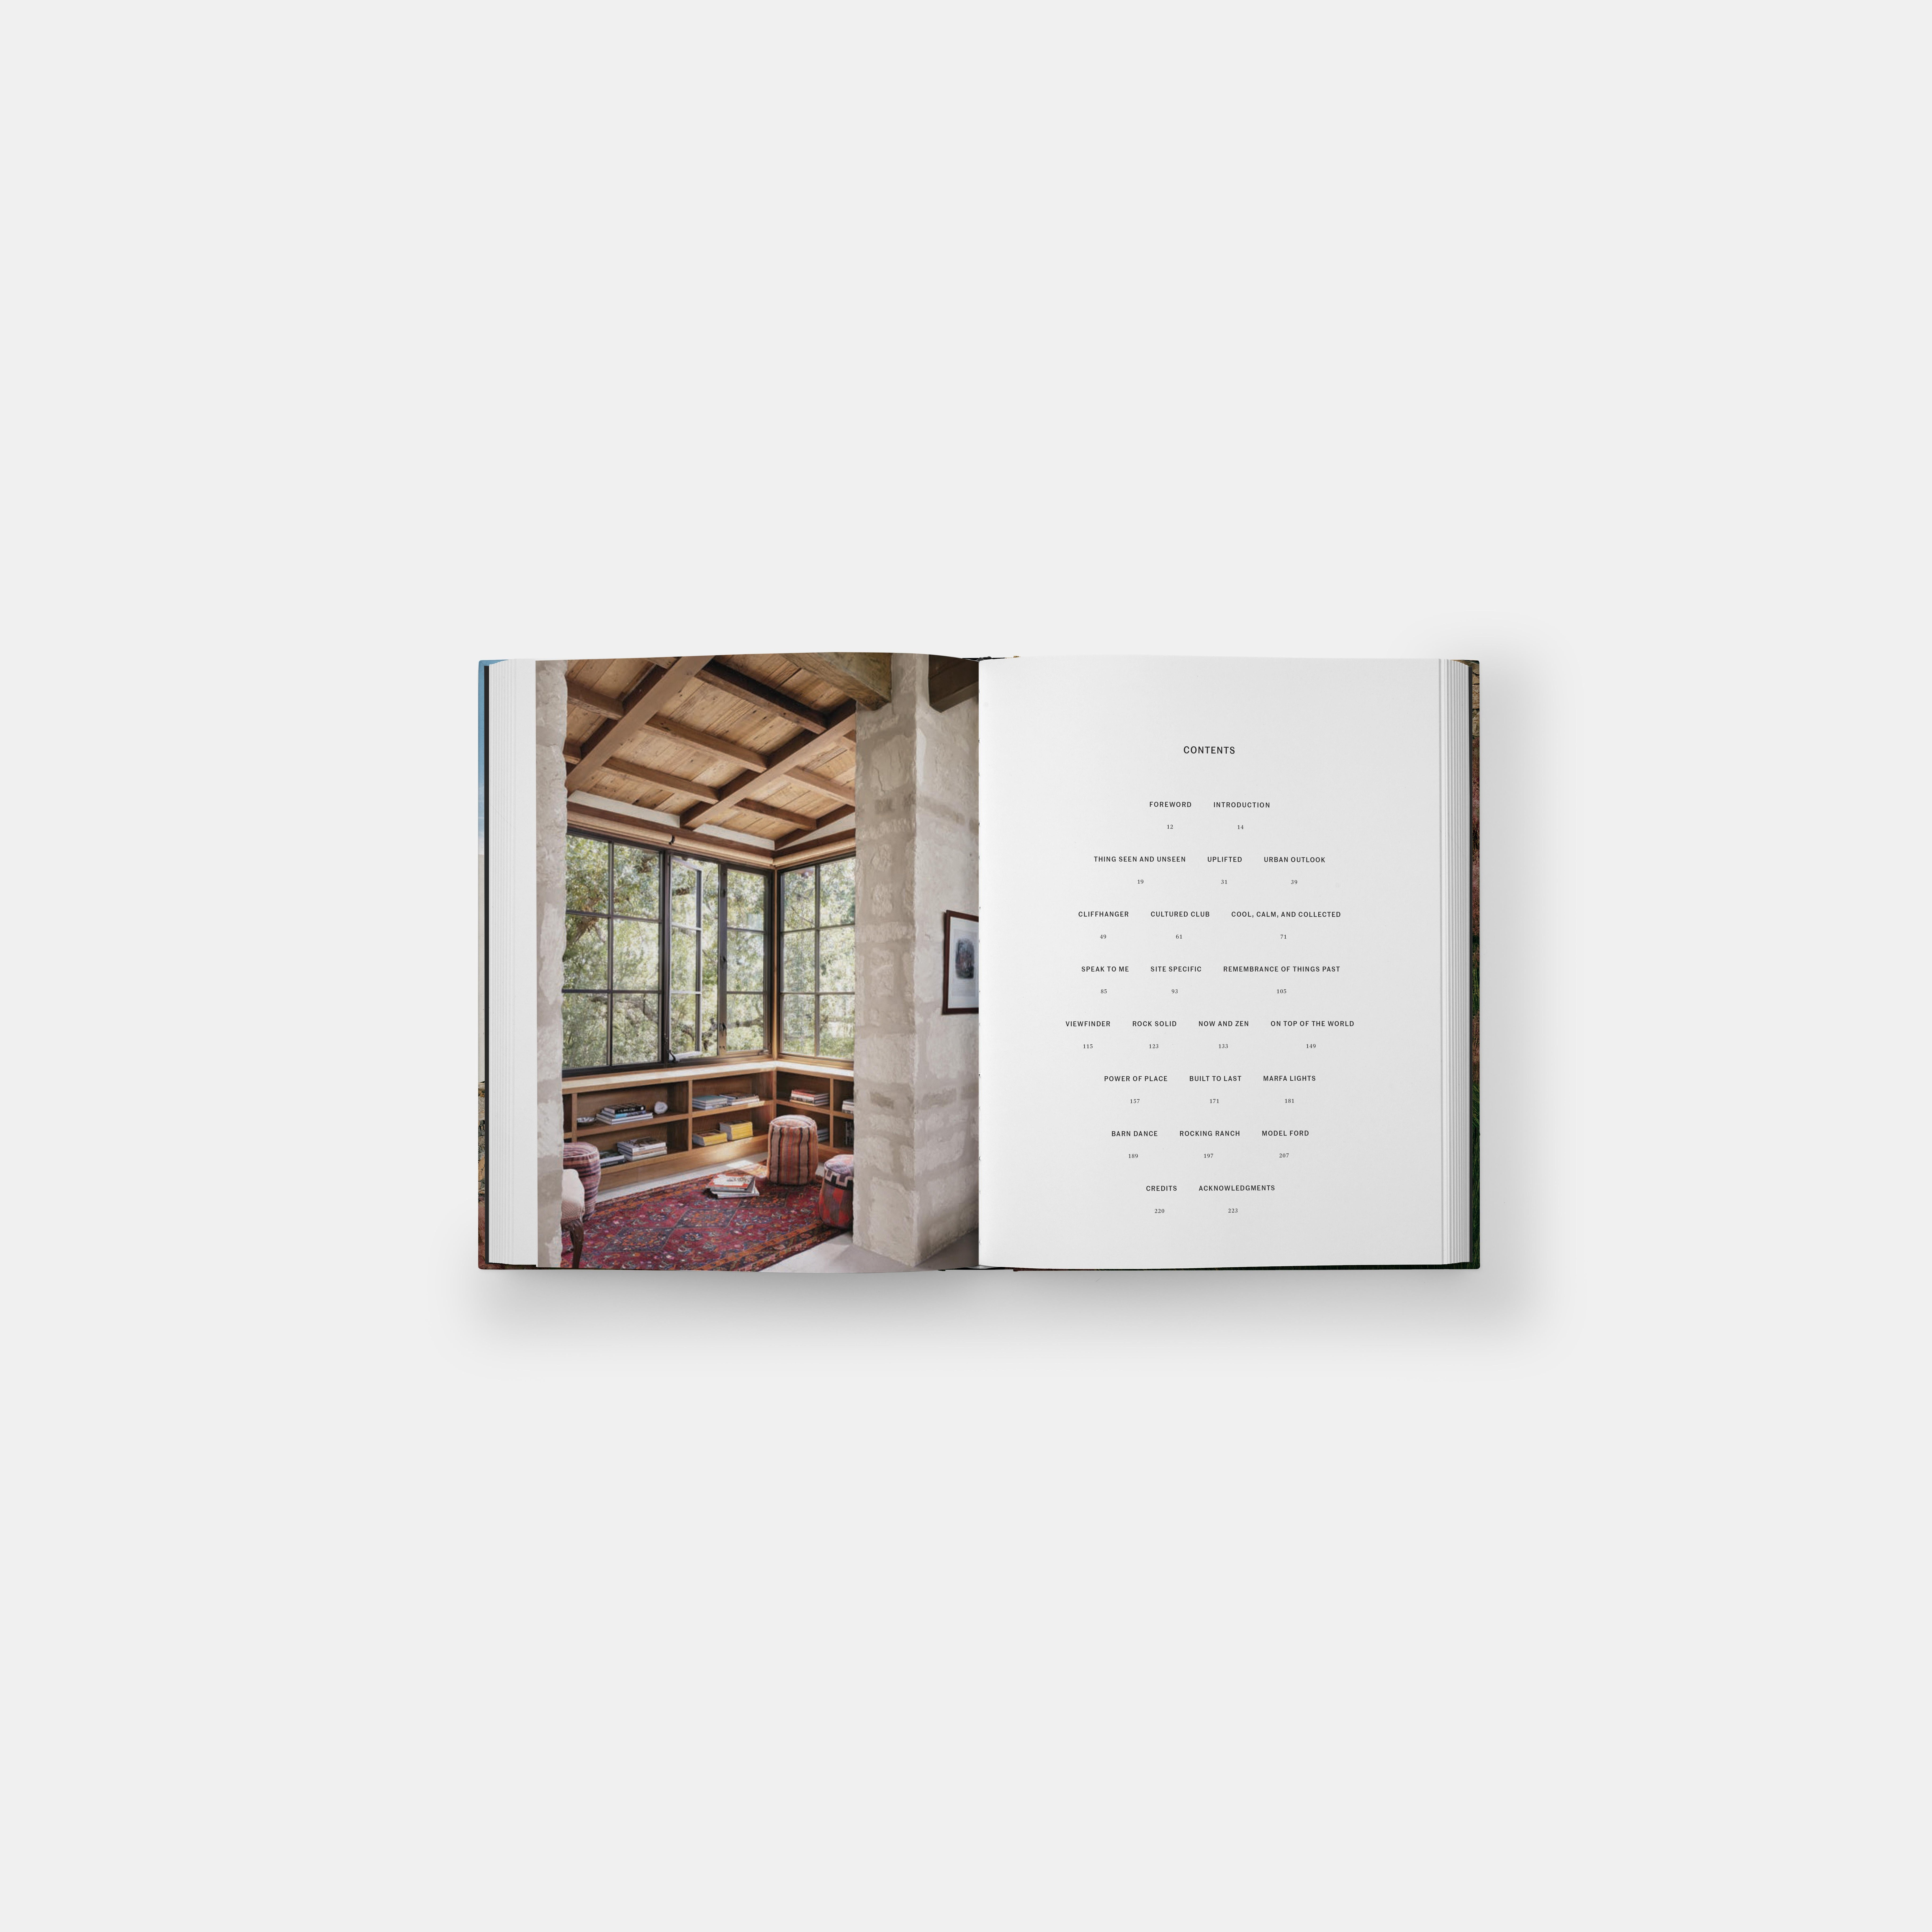 A compelling survey of Texas houses that draw both on the heritage of pioneer ranches and on the twentieth-century design principles of modernism.

Helen Thompson and Casey Dunn, the writer/photographer team that produced the exceptionally